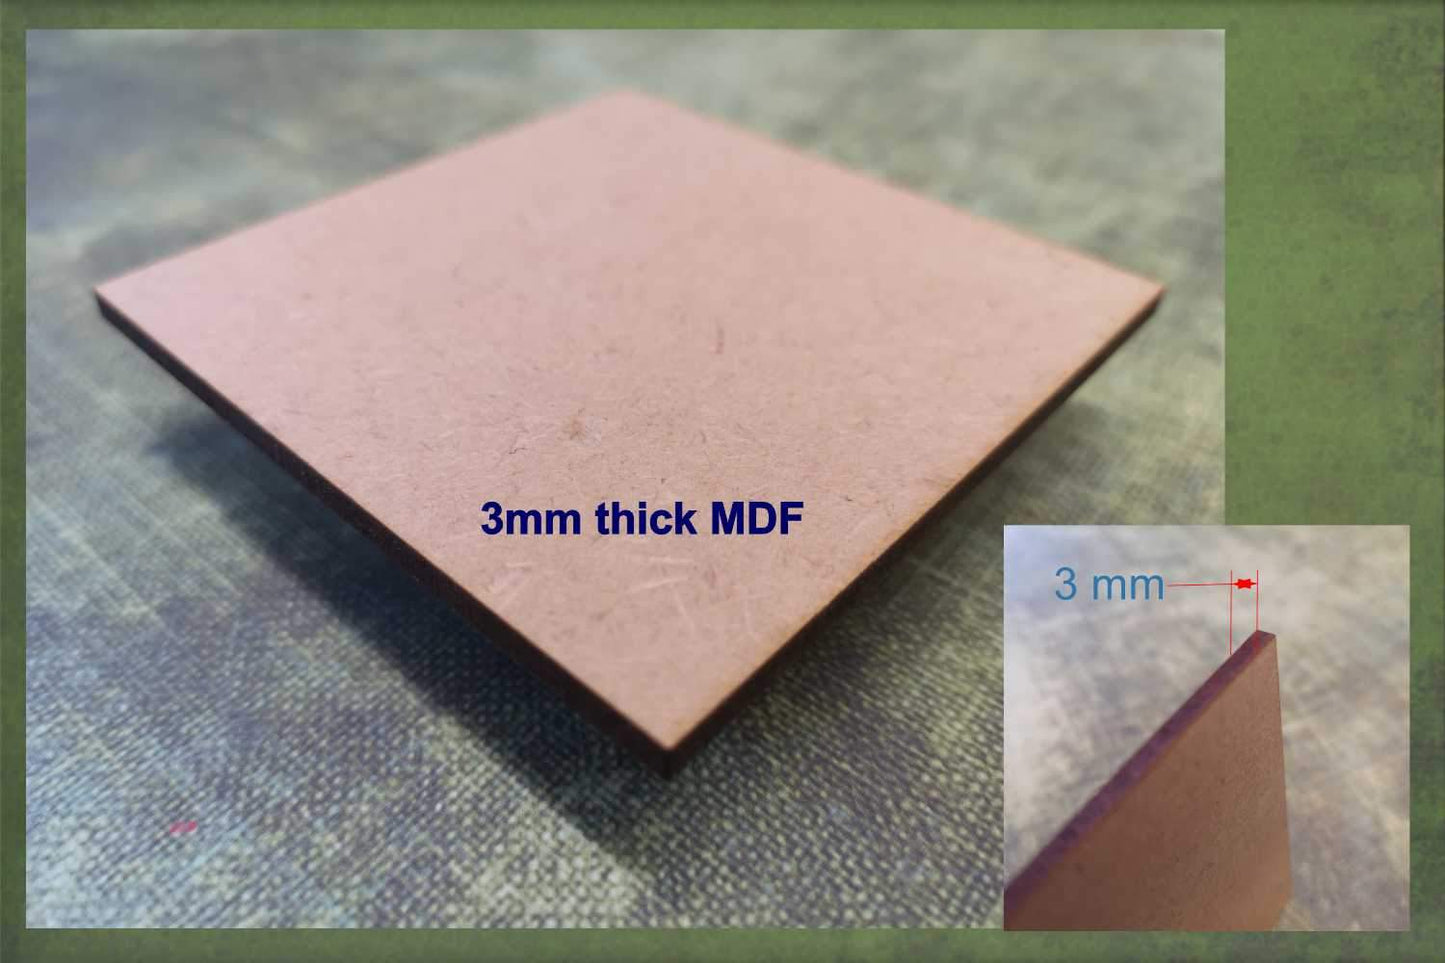 3mm thick MDF used to make the Stetson cowboy hat with etched detail cut-outs ready for crafting